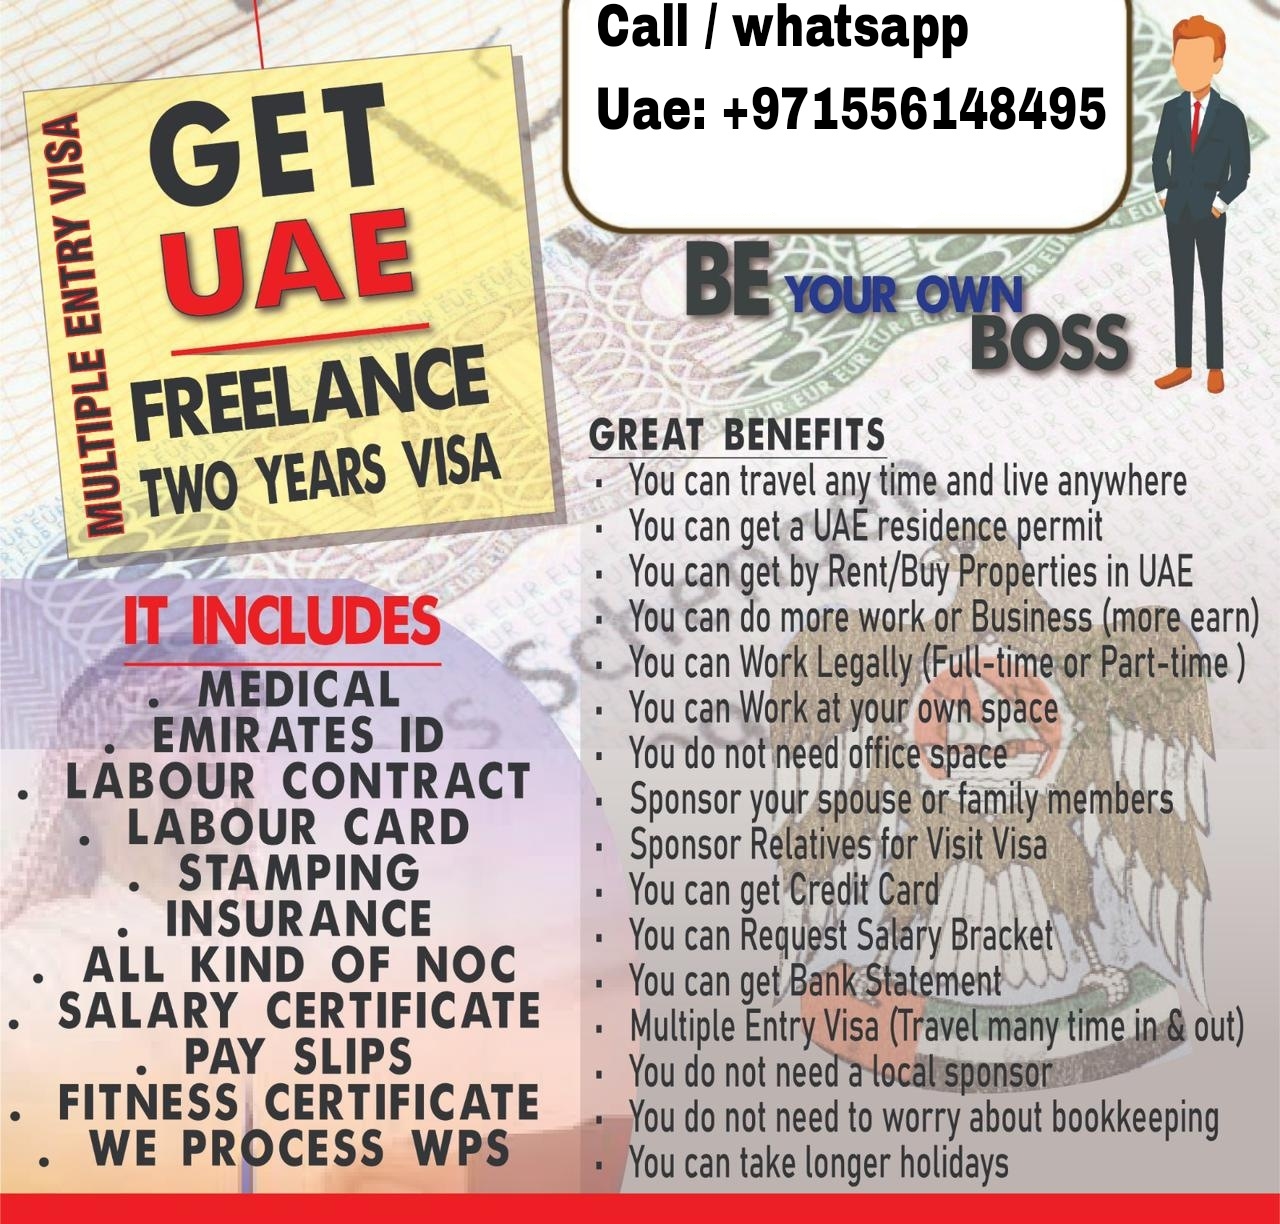 Freelance visa 2 years Available At Affordable Price